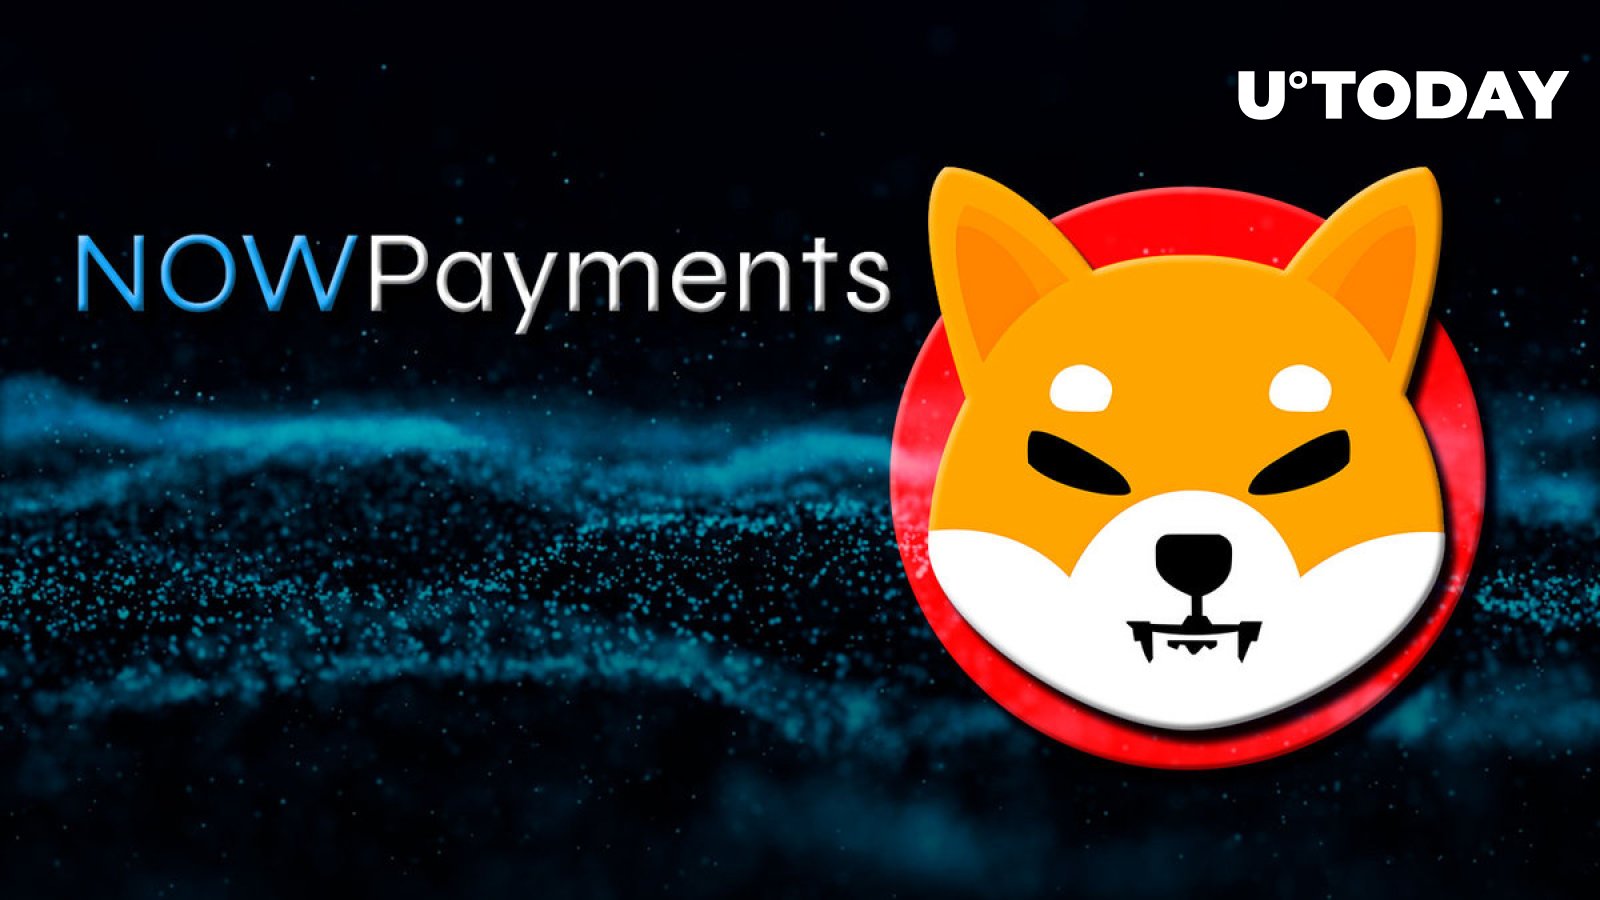 Shiba Inu (SHIB) Can Now Be Accepted Through NOWPayments POS Terminal: Details